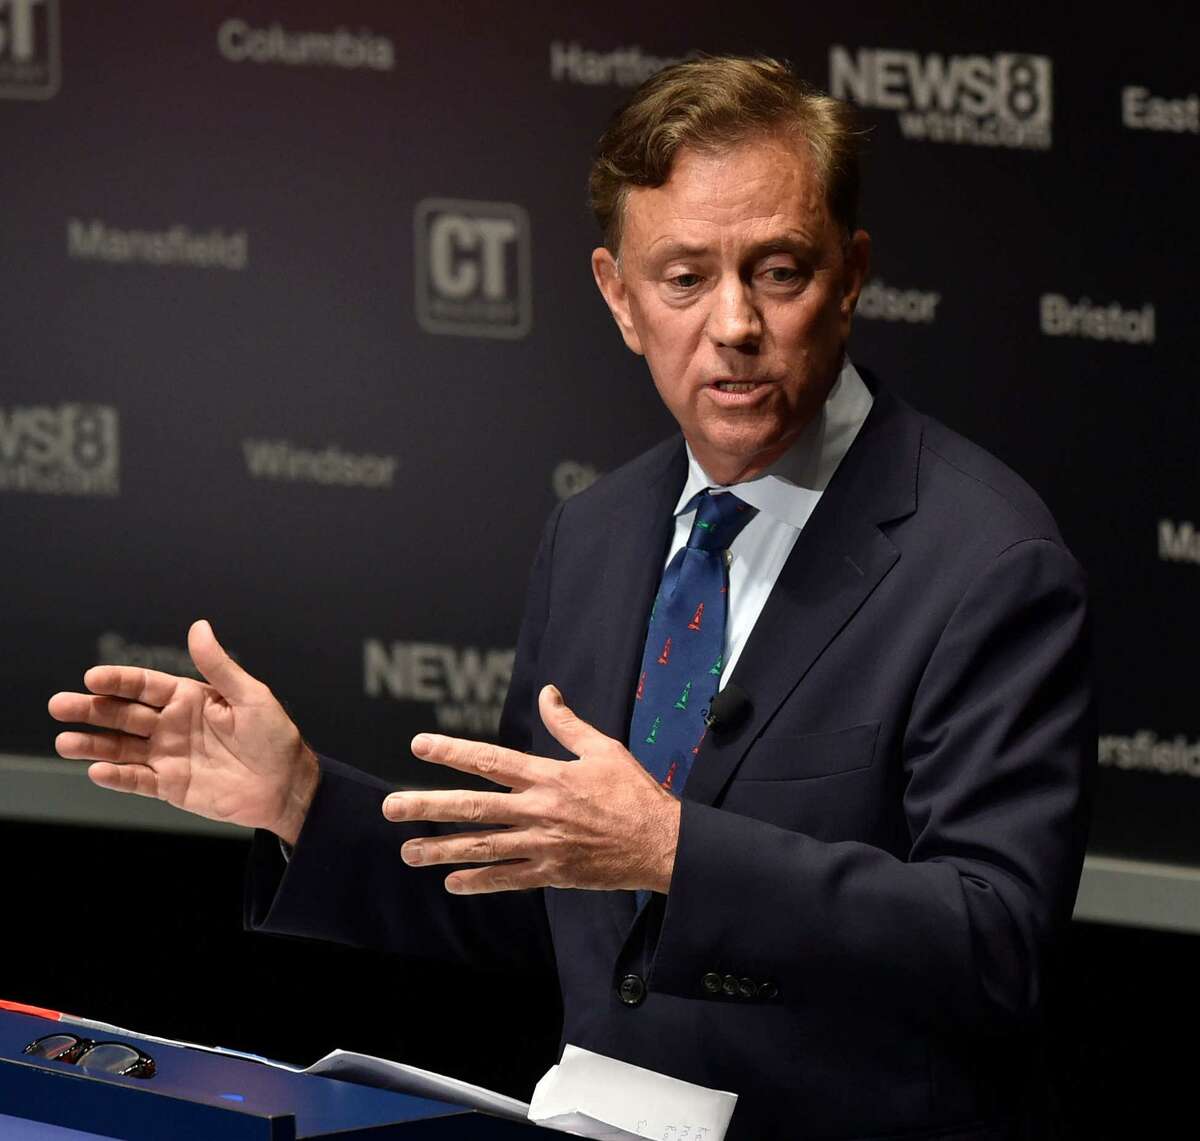 Democratic gubernatorial candidate Ned Lamont during a debate against Republican gubernatorial candidate Bob Stefanowski Monday, September 17, 2018, at the Shubert Theatre in New Haven.